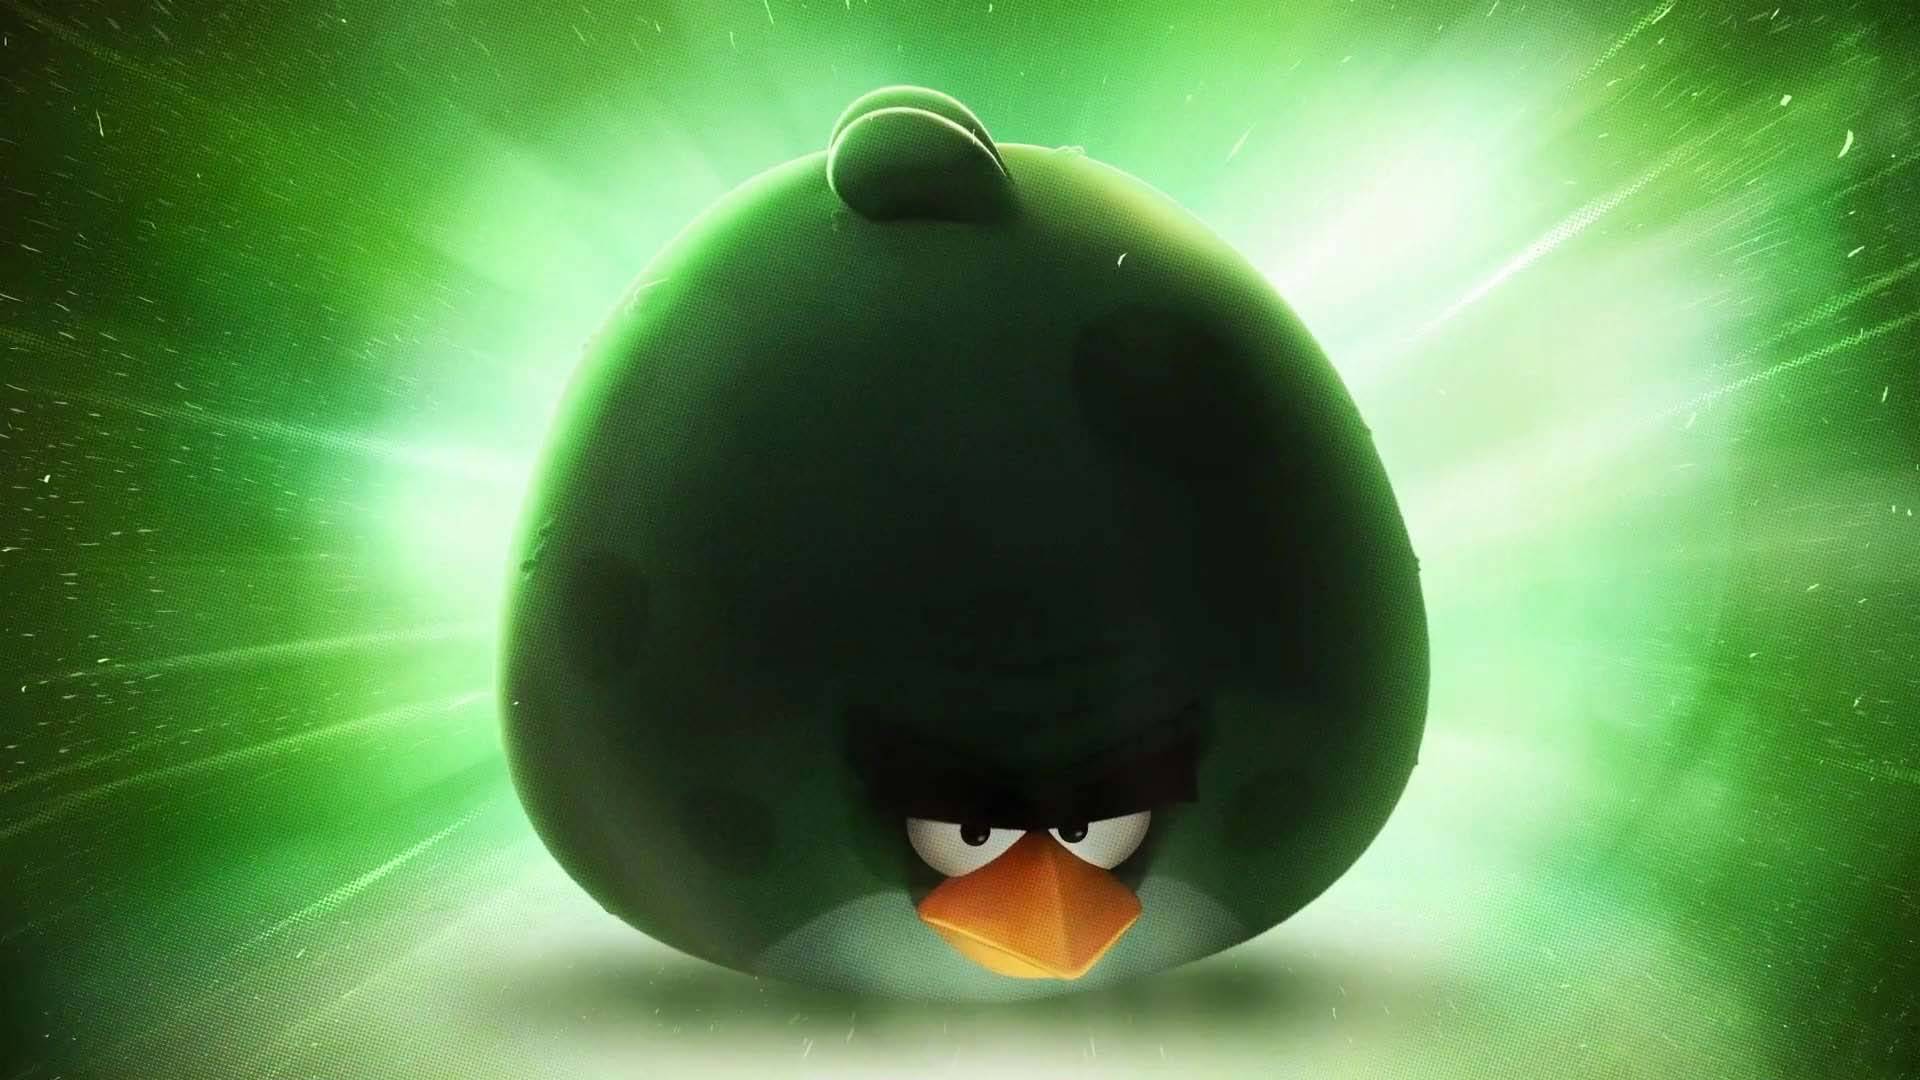 Green Angry Birds Wallpaper Image for Mac - Cartoons Wallpapers